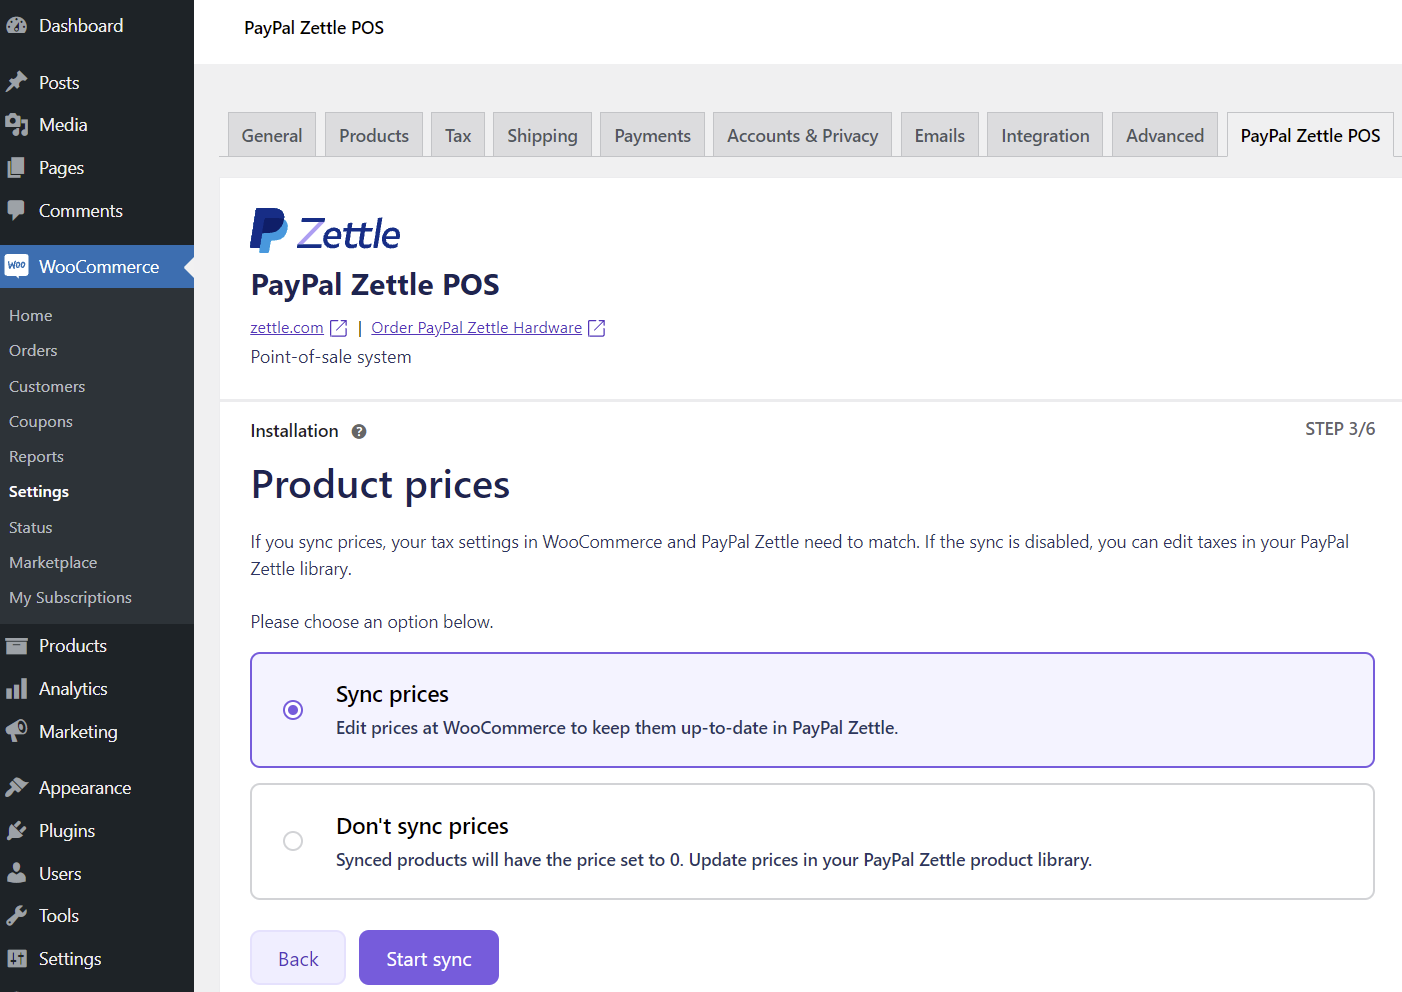 PayPal Zettle POS installation STEP 3